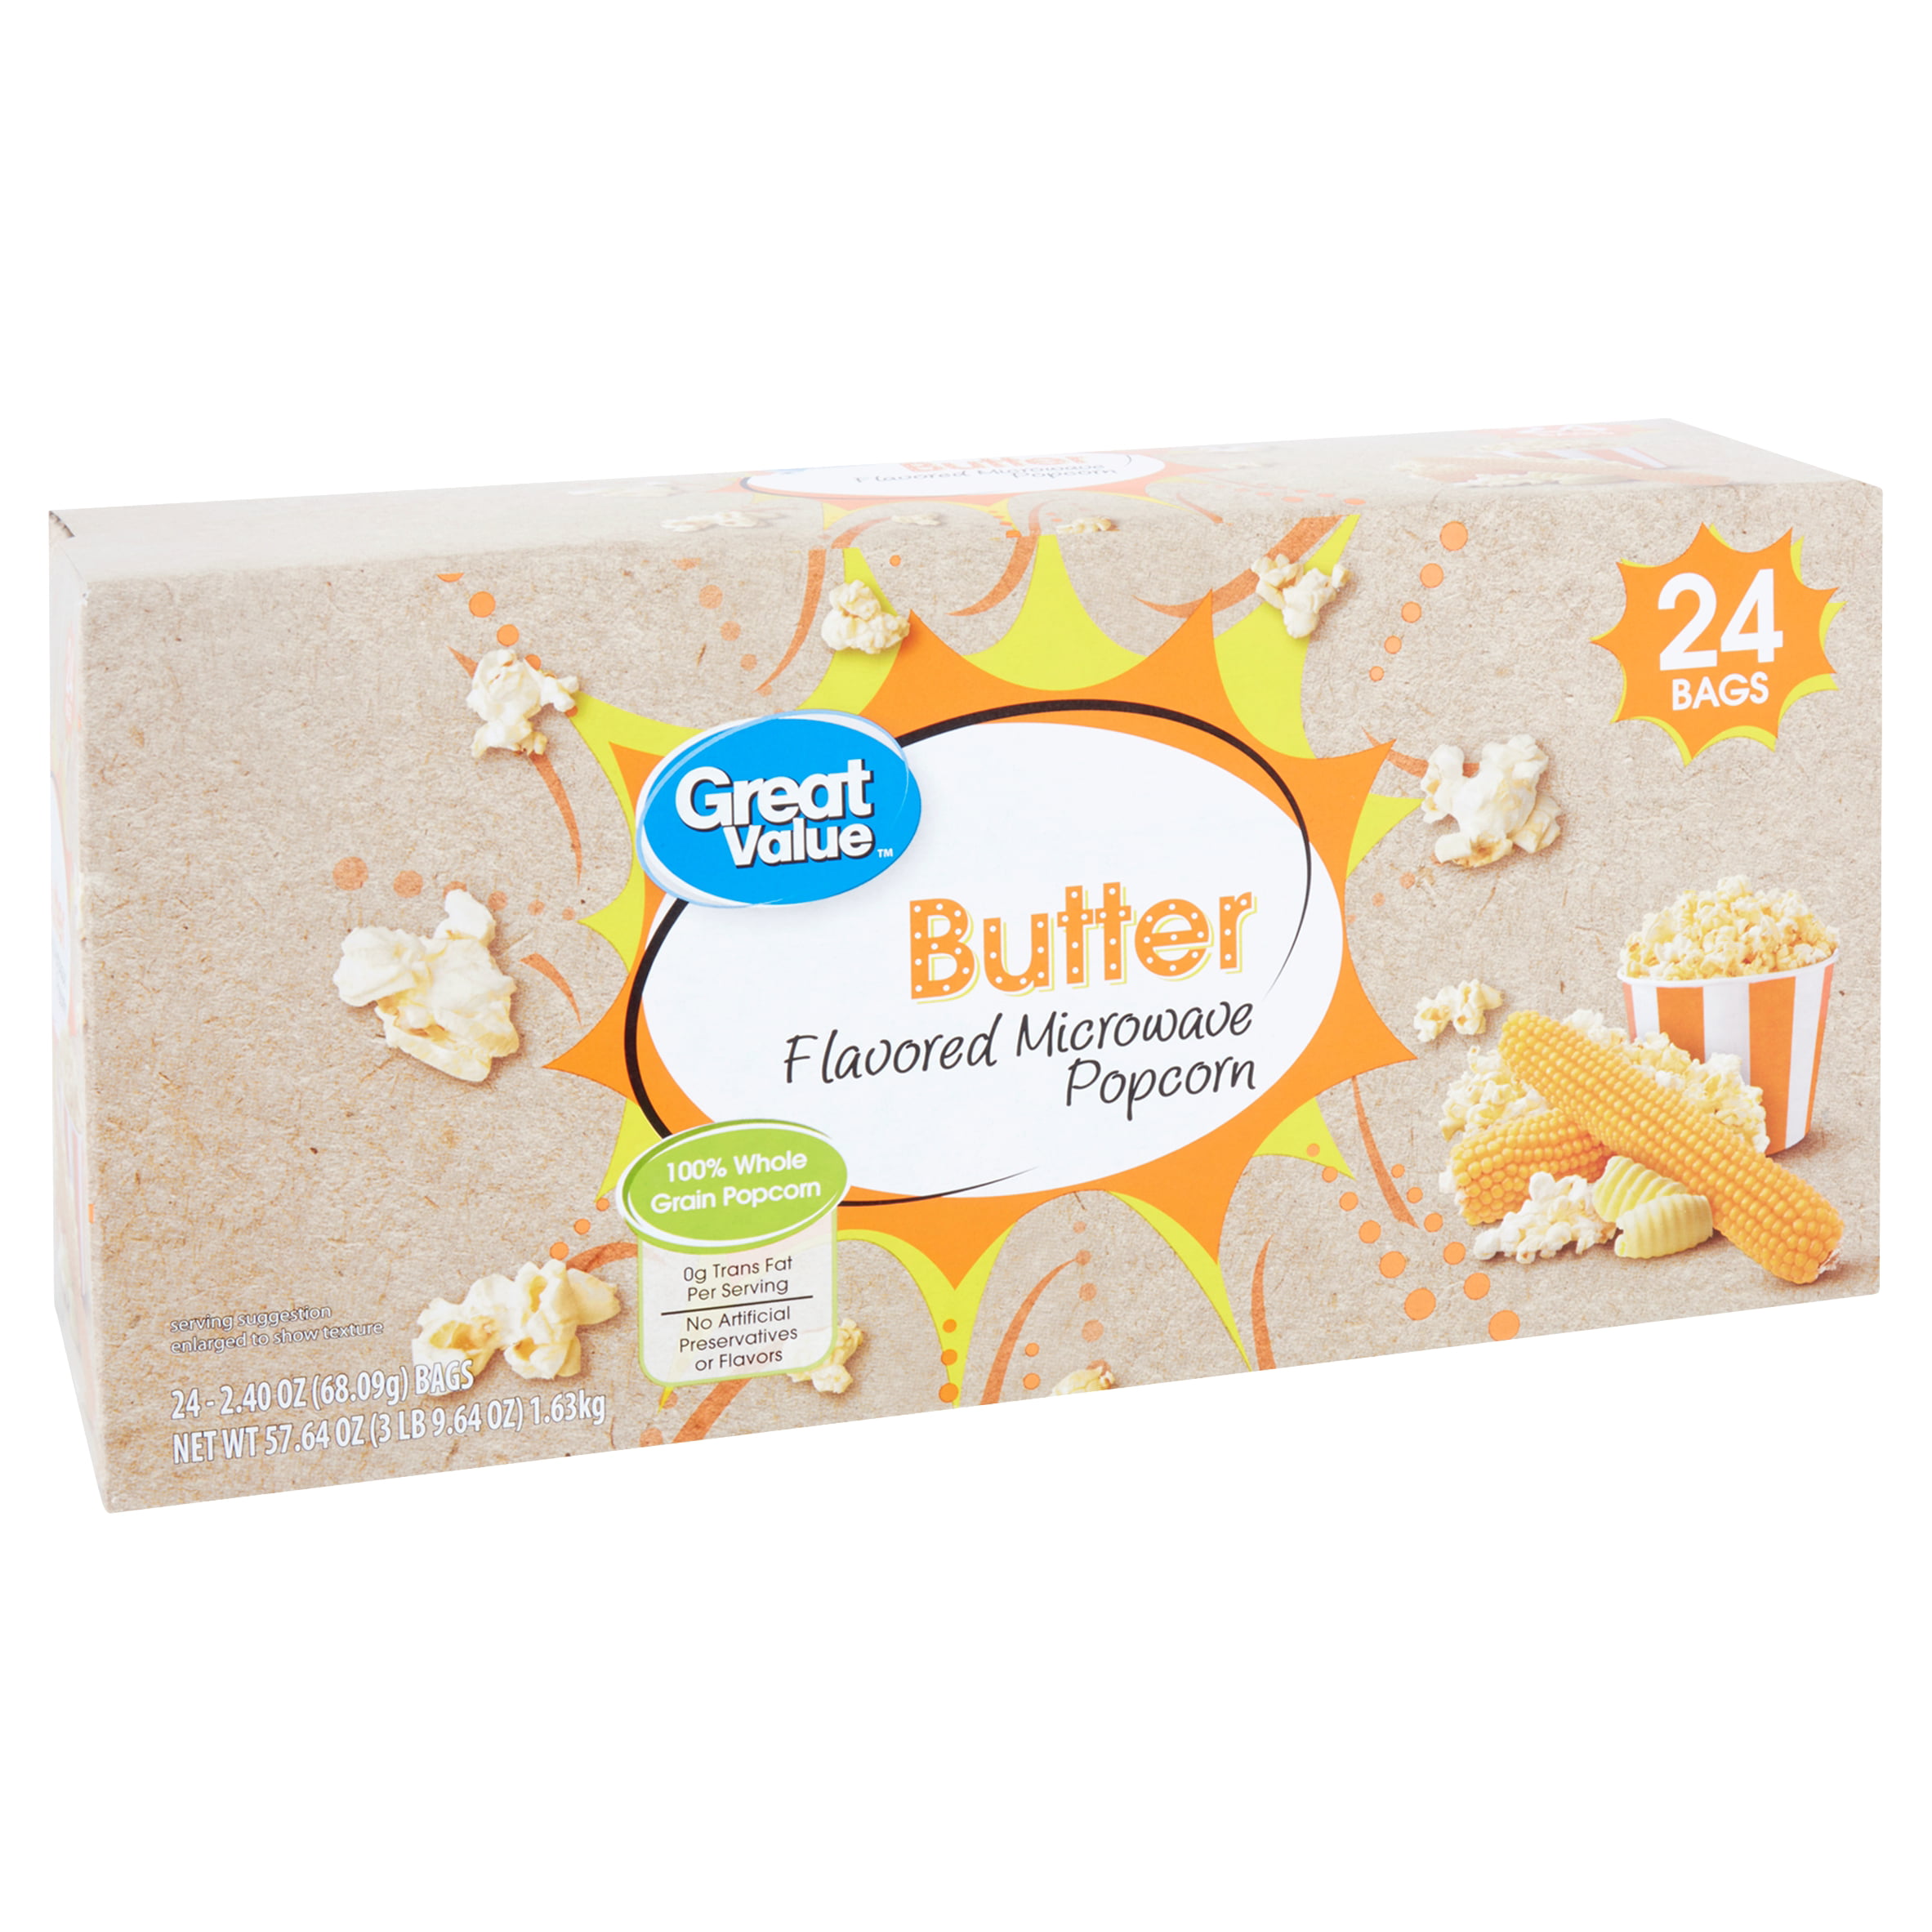 Great Value Butter Flavored Microwave Popcorn, 2.40 oz, 24 count